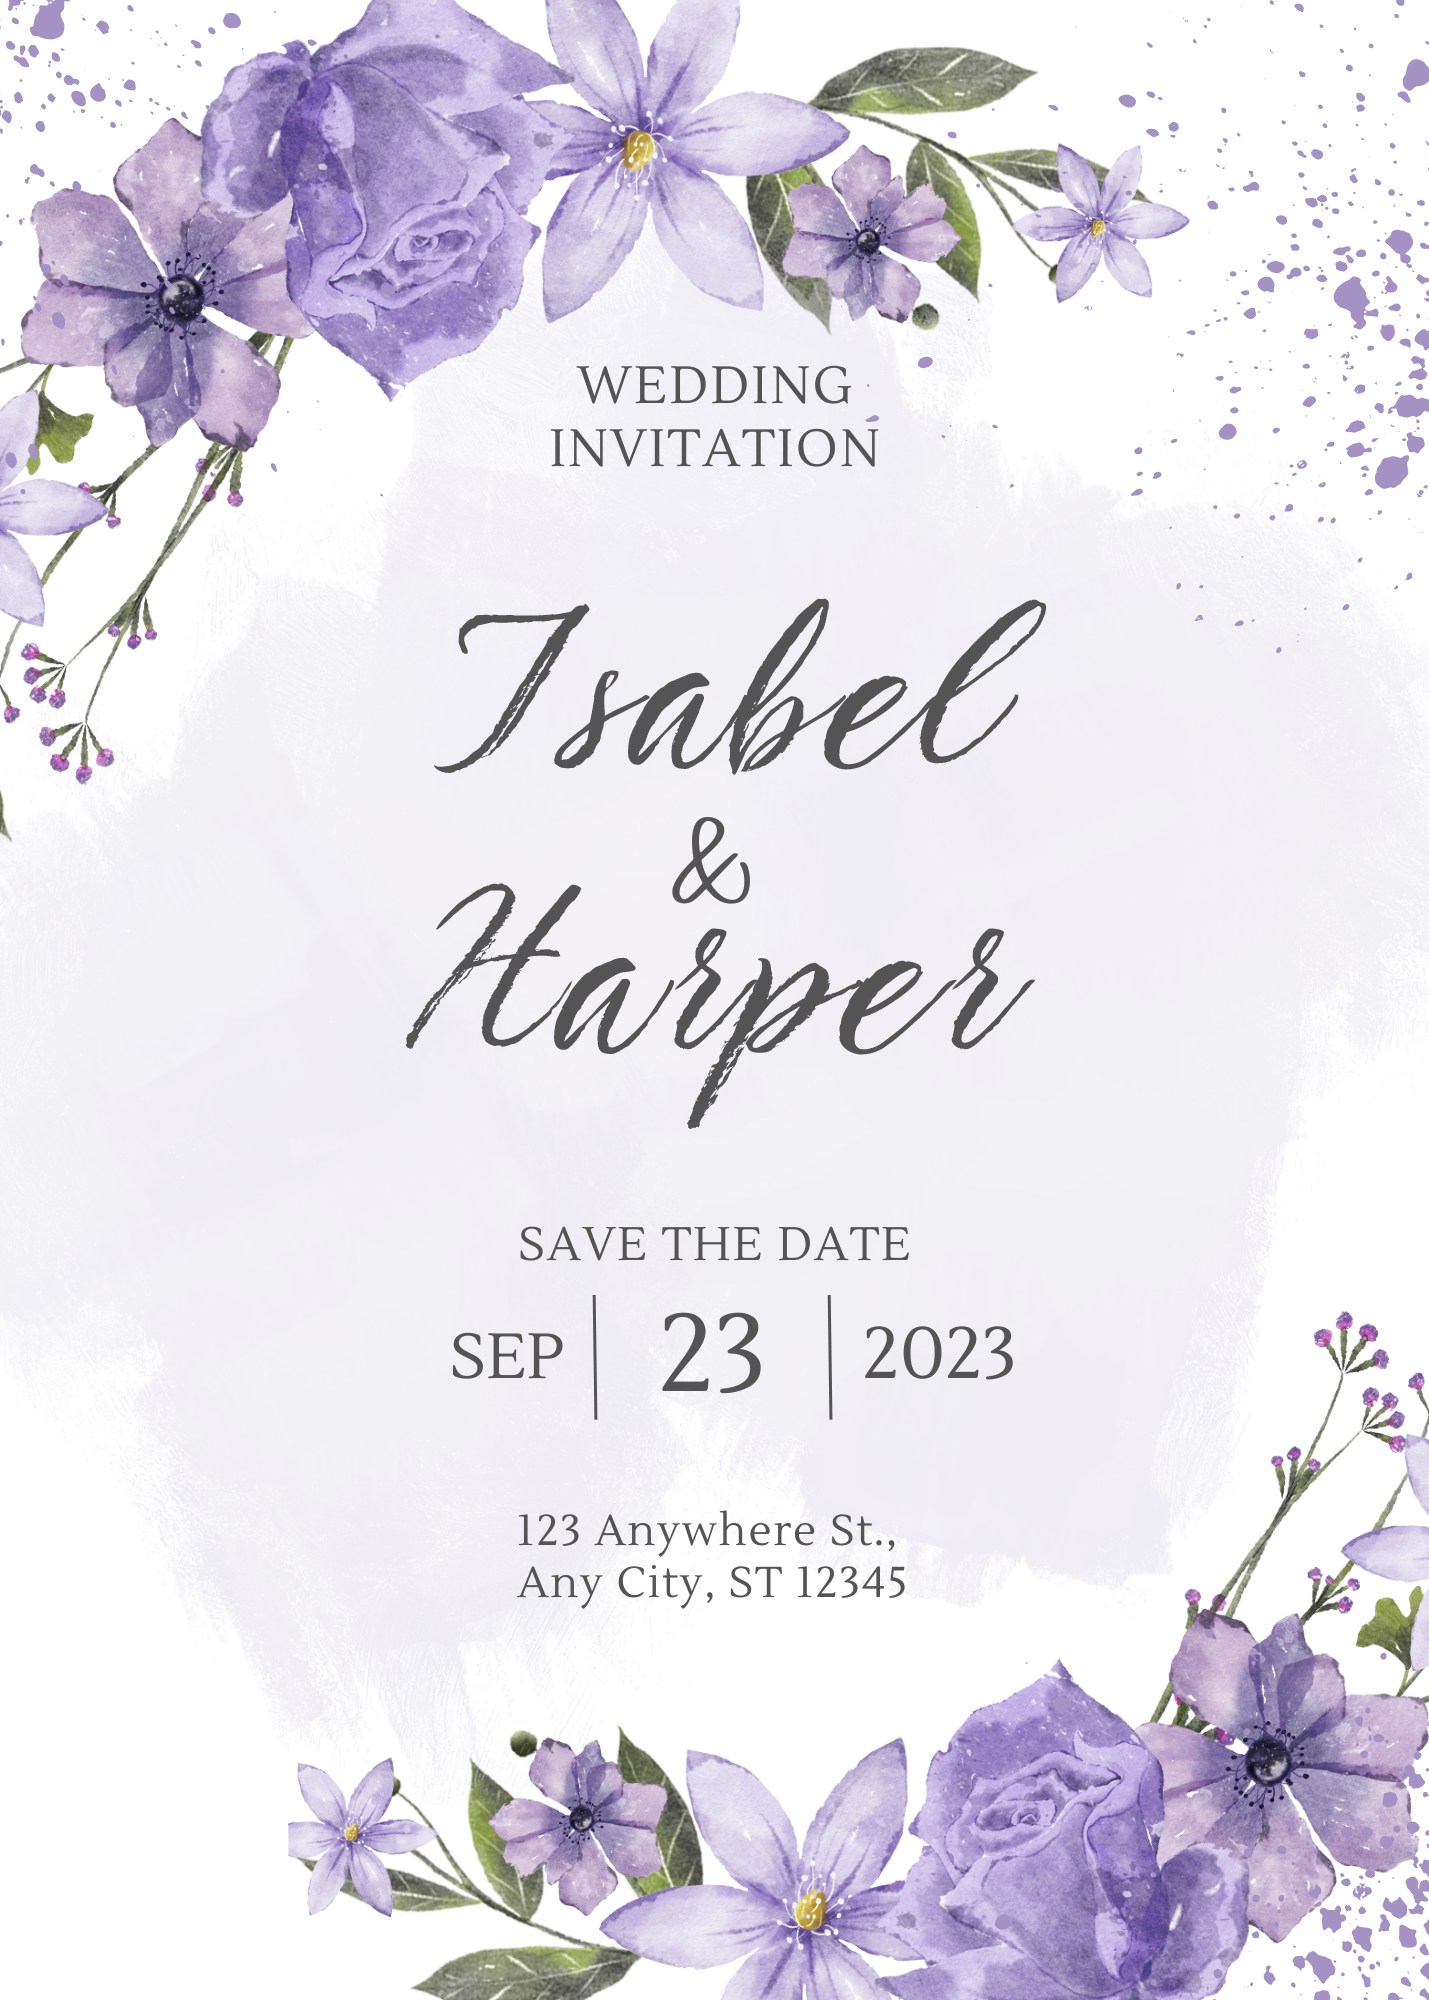 Green Watercolor Leaves Save the Date Invitation (6)